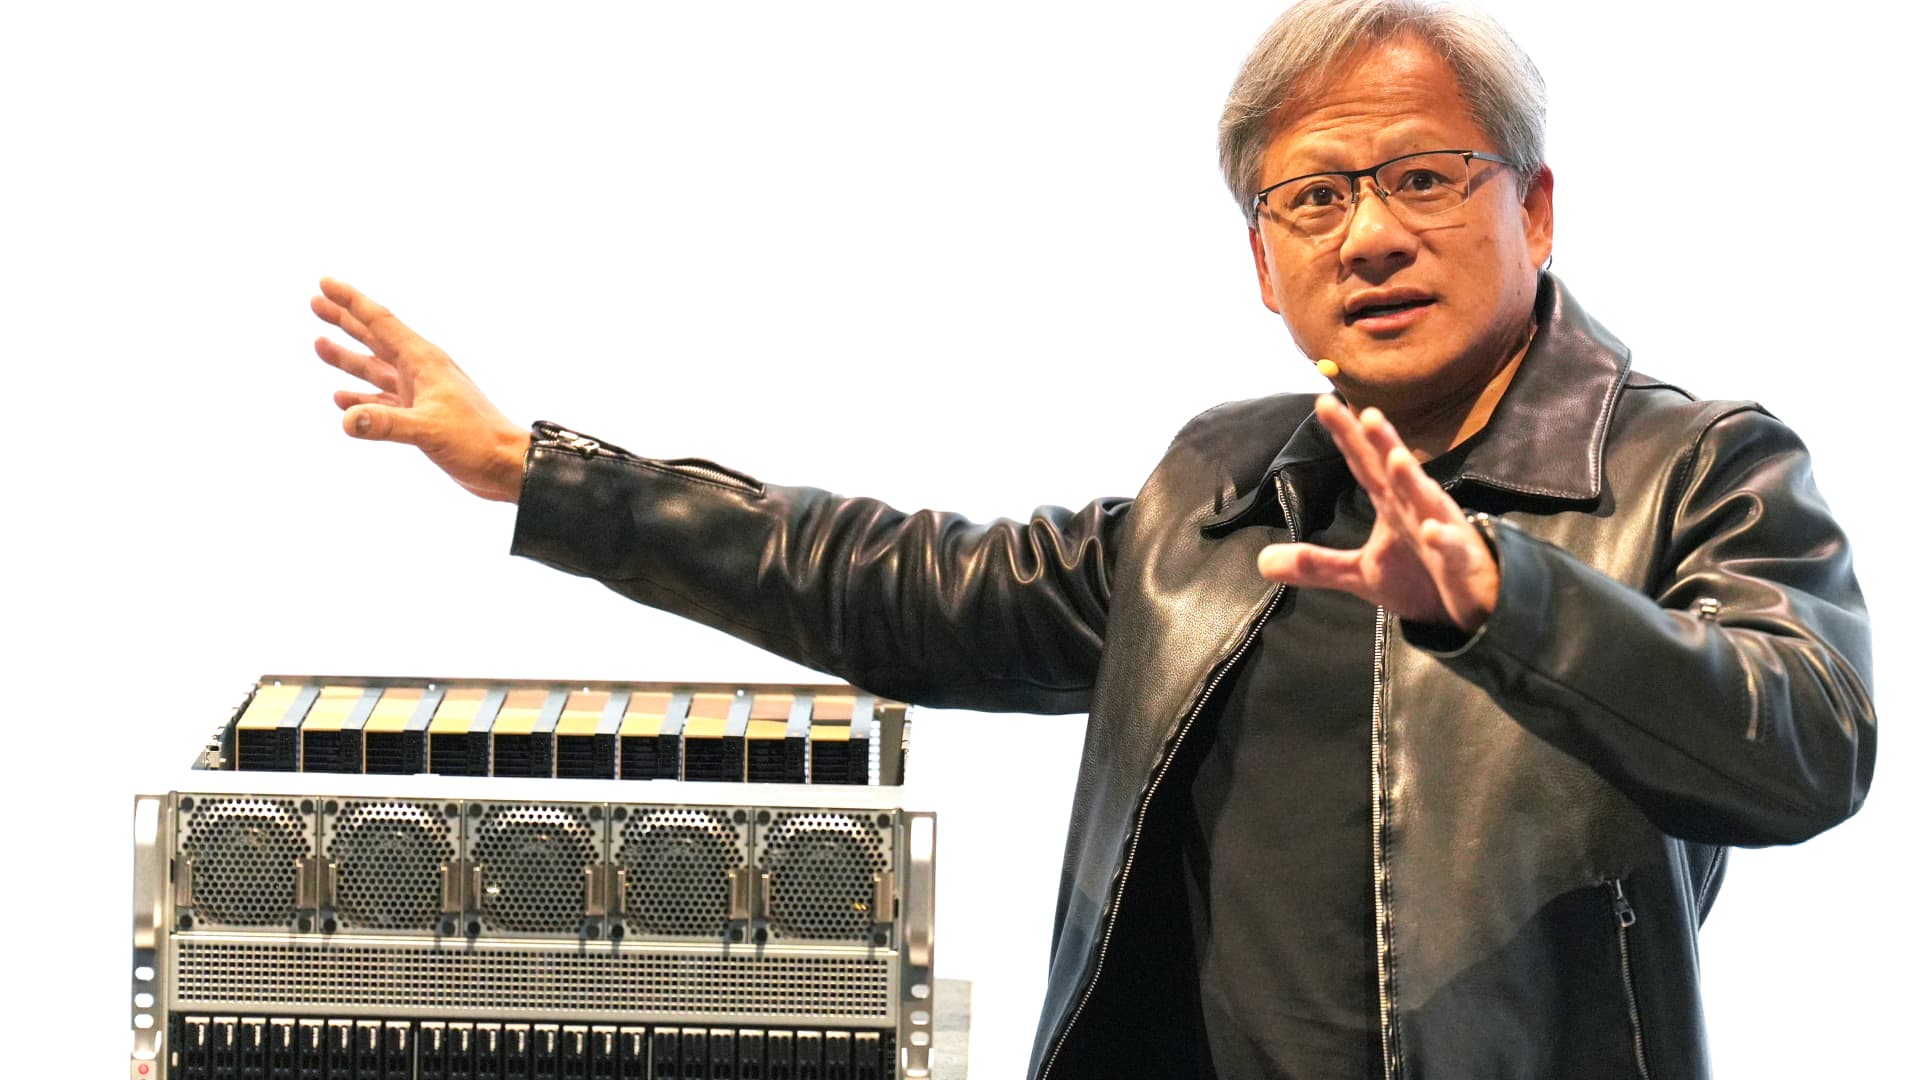 Nvidia's AI-driven stock surge pushed earnings multiple three times higher than Tesla's